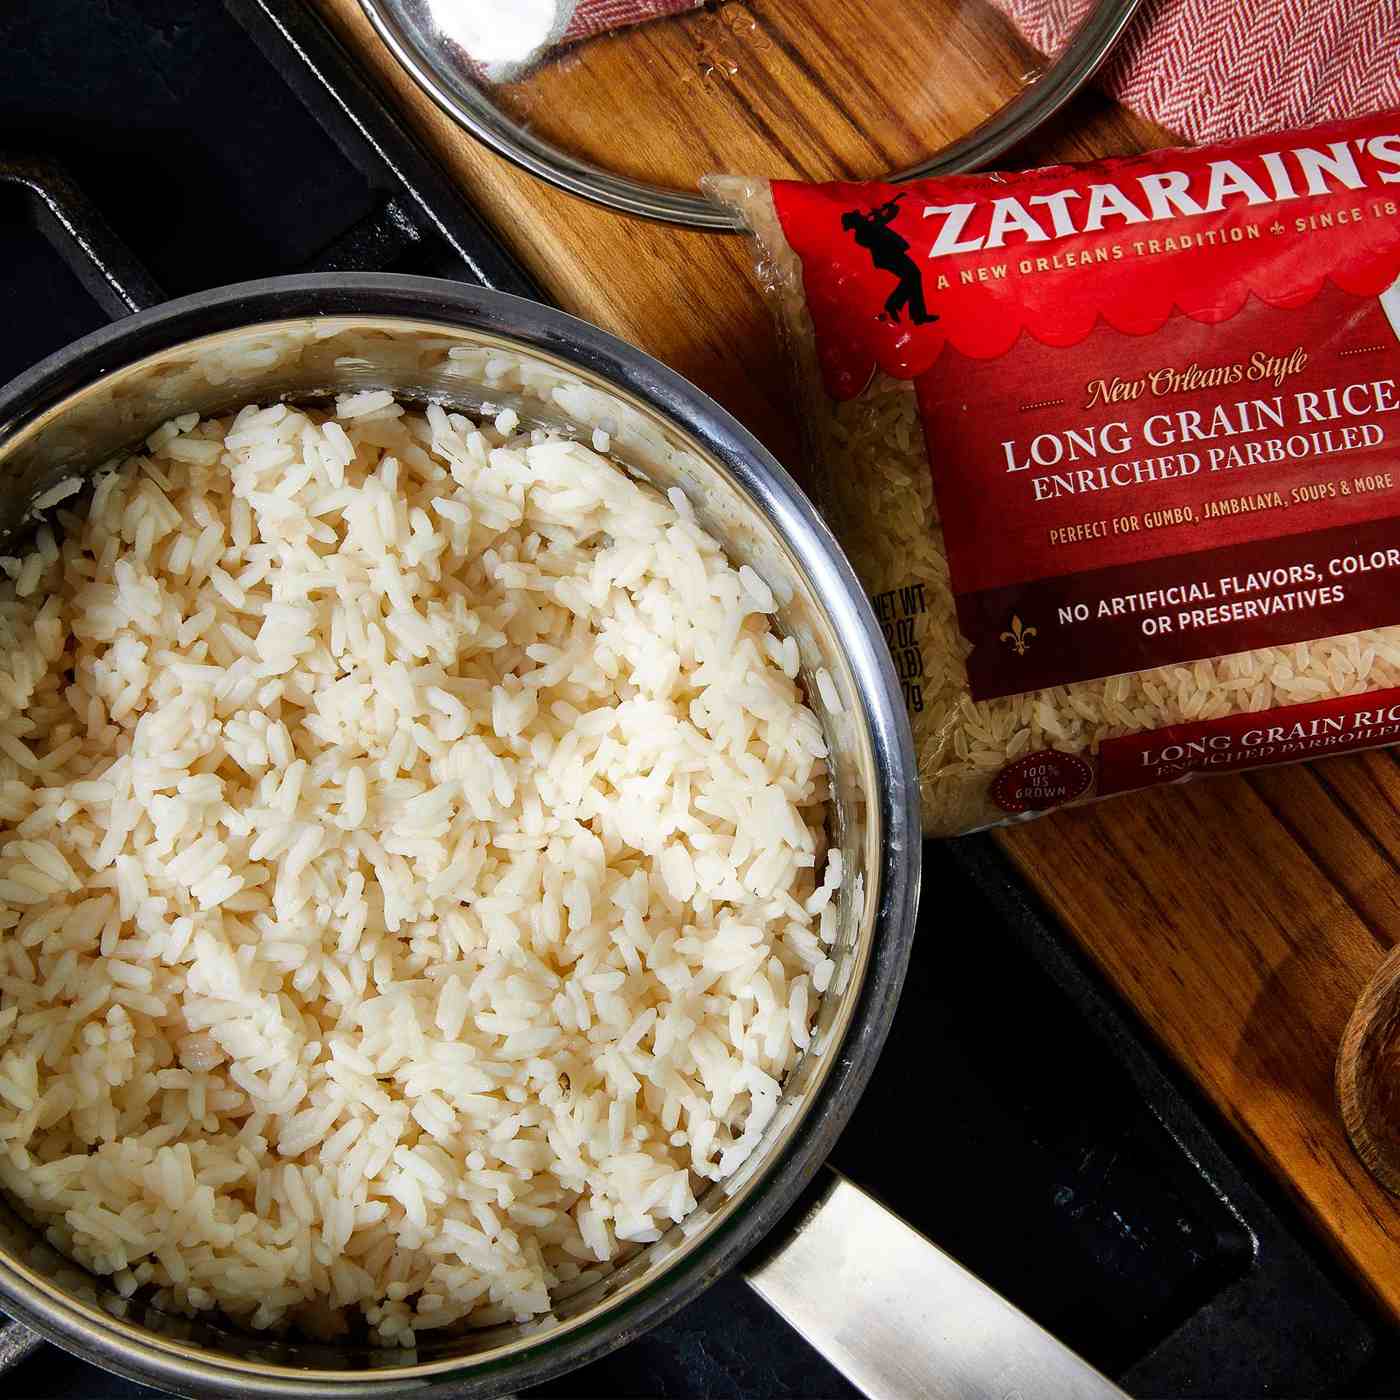 Zatarain's Enriched Parboiled Long Grain Rice; image 7 of 8